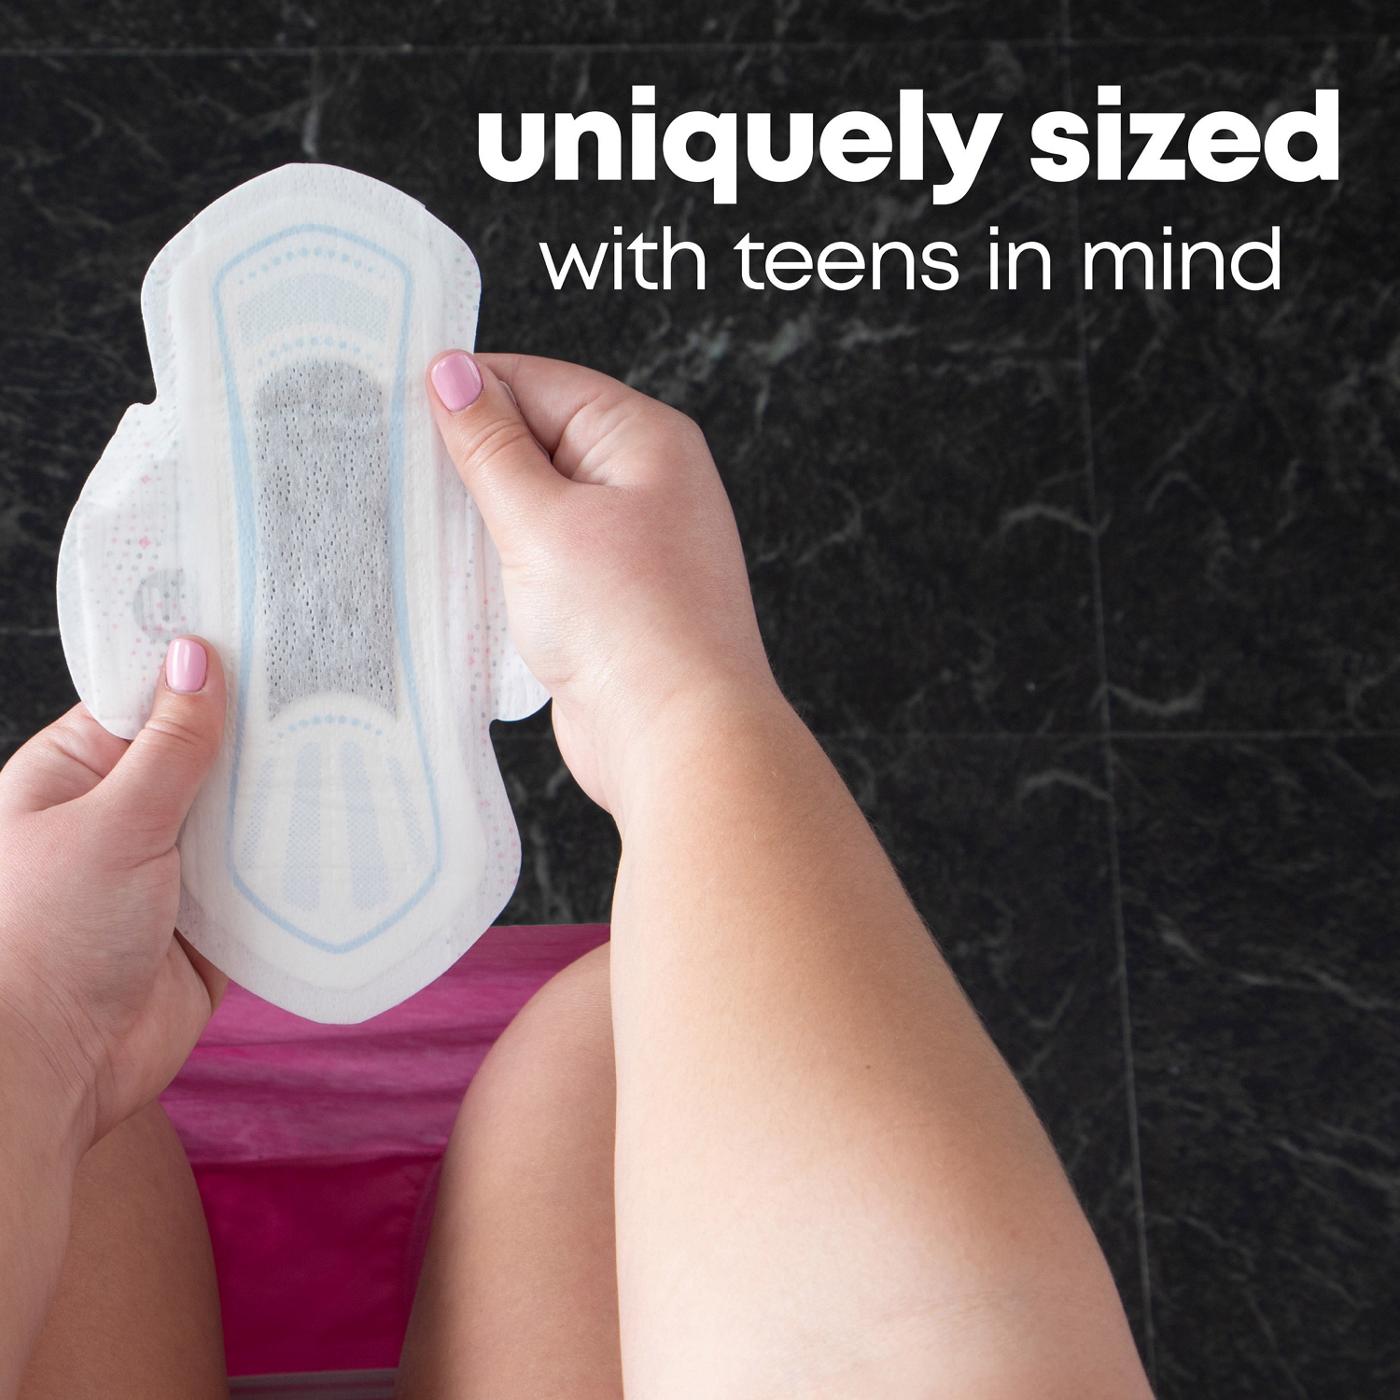 U by Kotex Balance - Sized for Teens Ultra Thin Pads with Wings - Heavy Absorbency; image 8 of 8